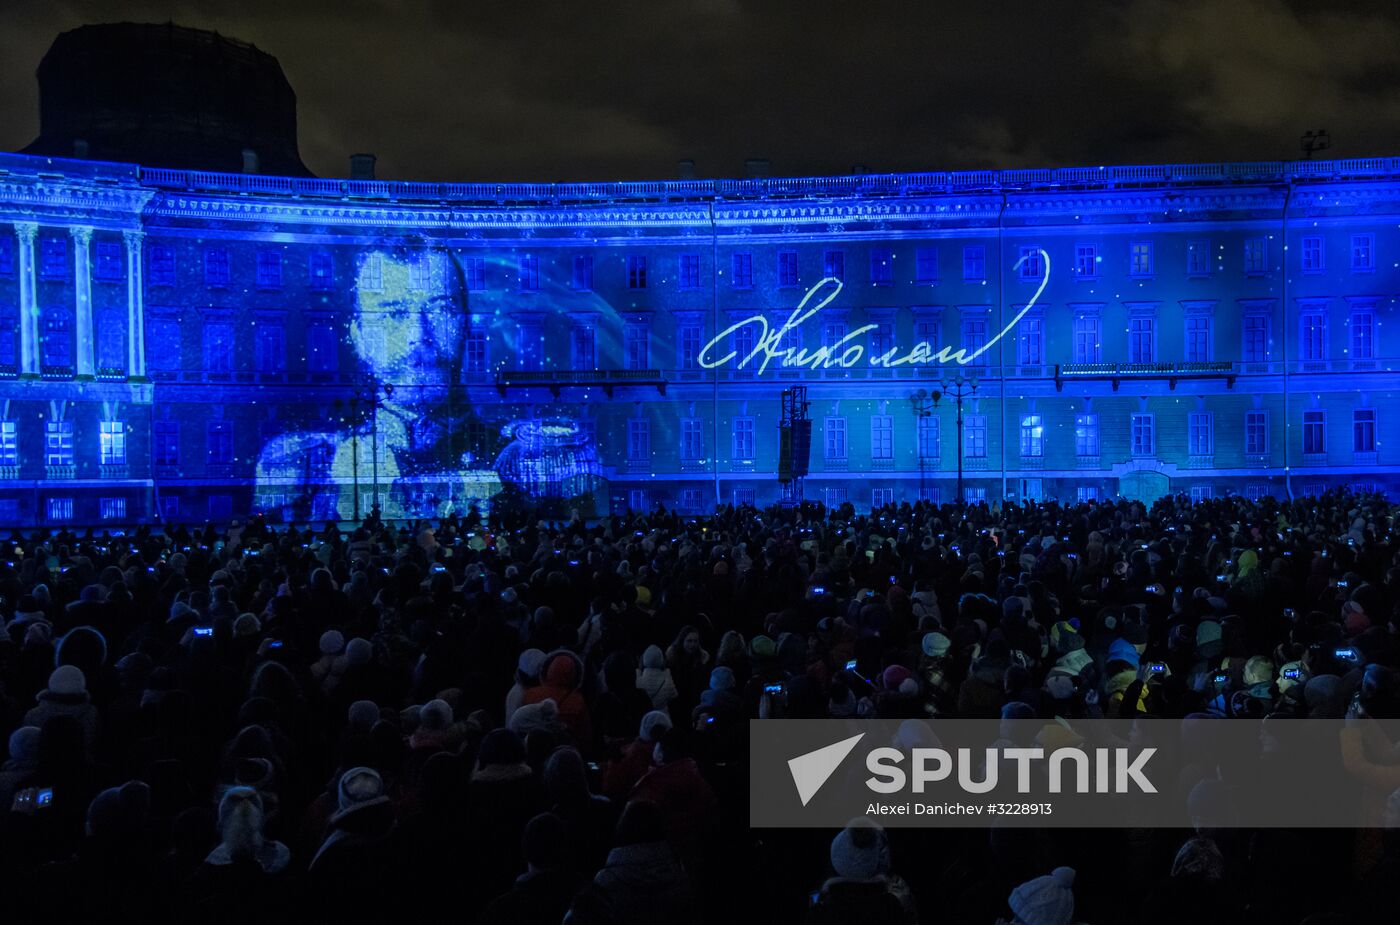 3D video mapping show on Palace Square in St. Petersburg